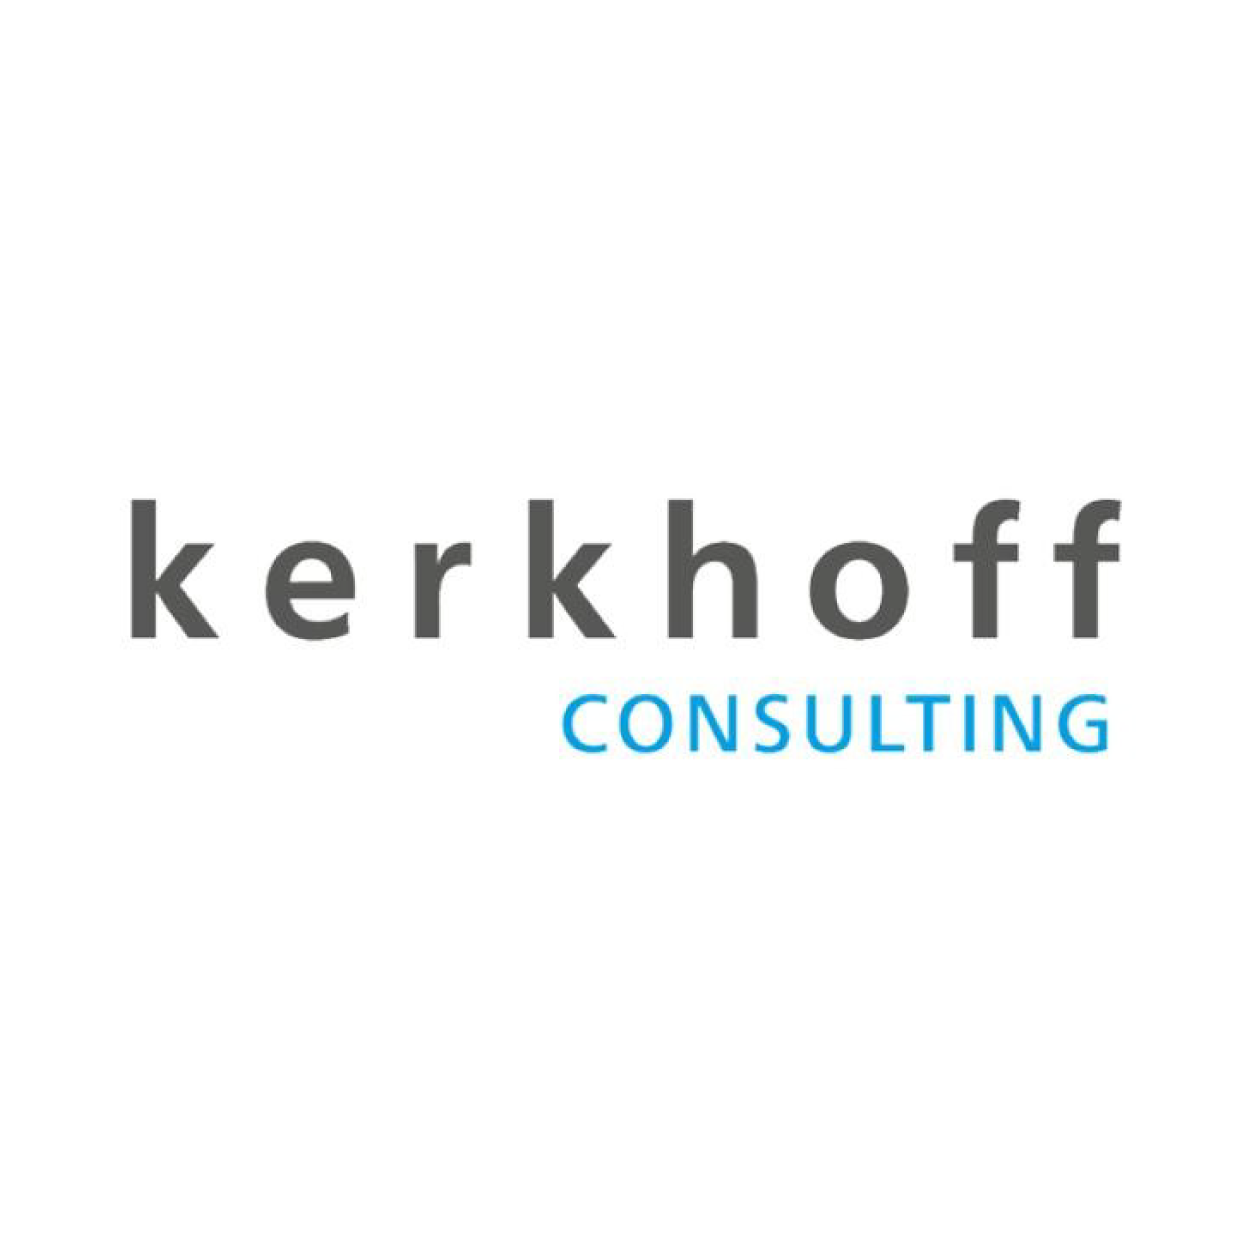 Kerkhoff Consulting